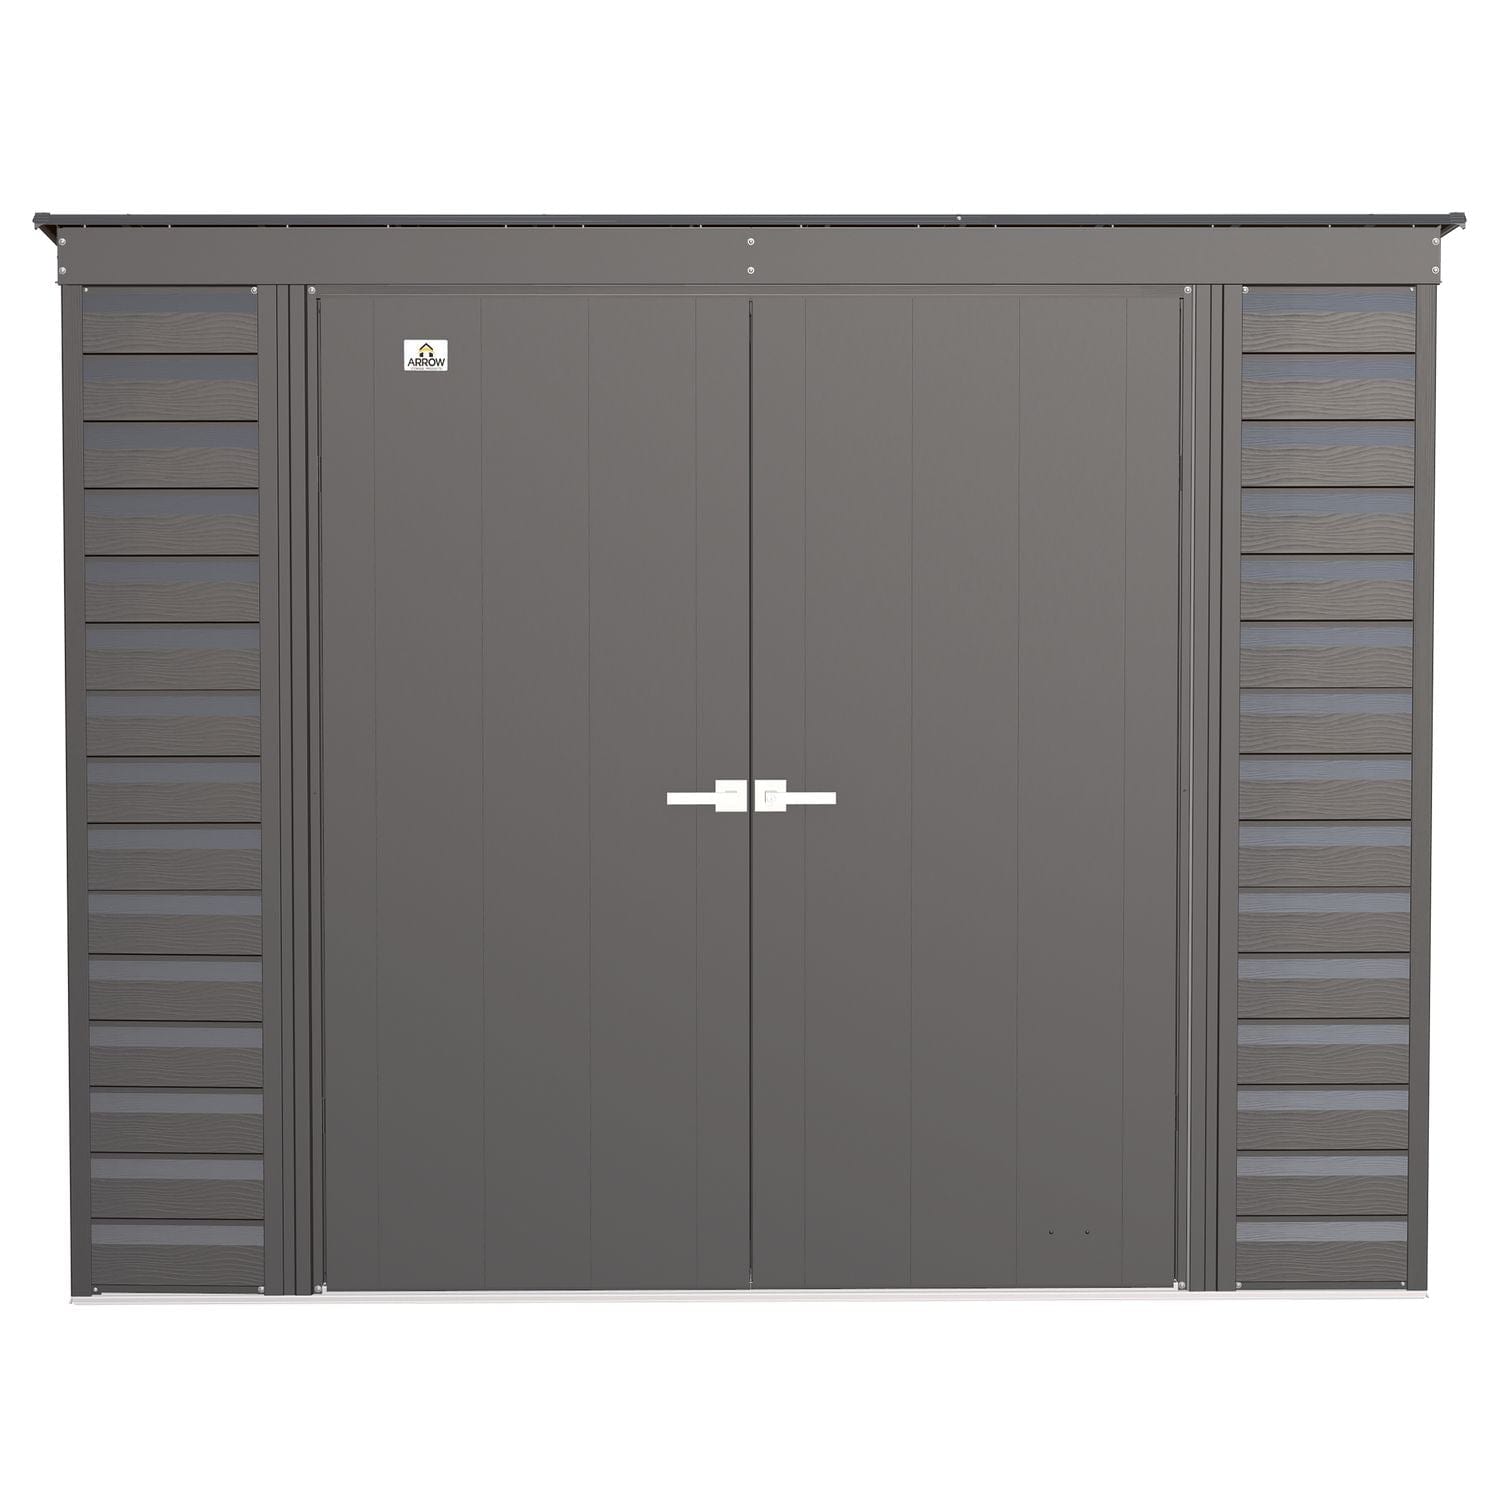 Arrow Sheds & Storage Buildings Arrow | Select Pent Roof Steel Storage Shed, 8x4 ft., Charcoal SCP84CC